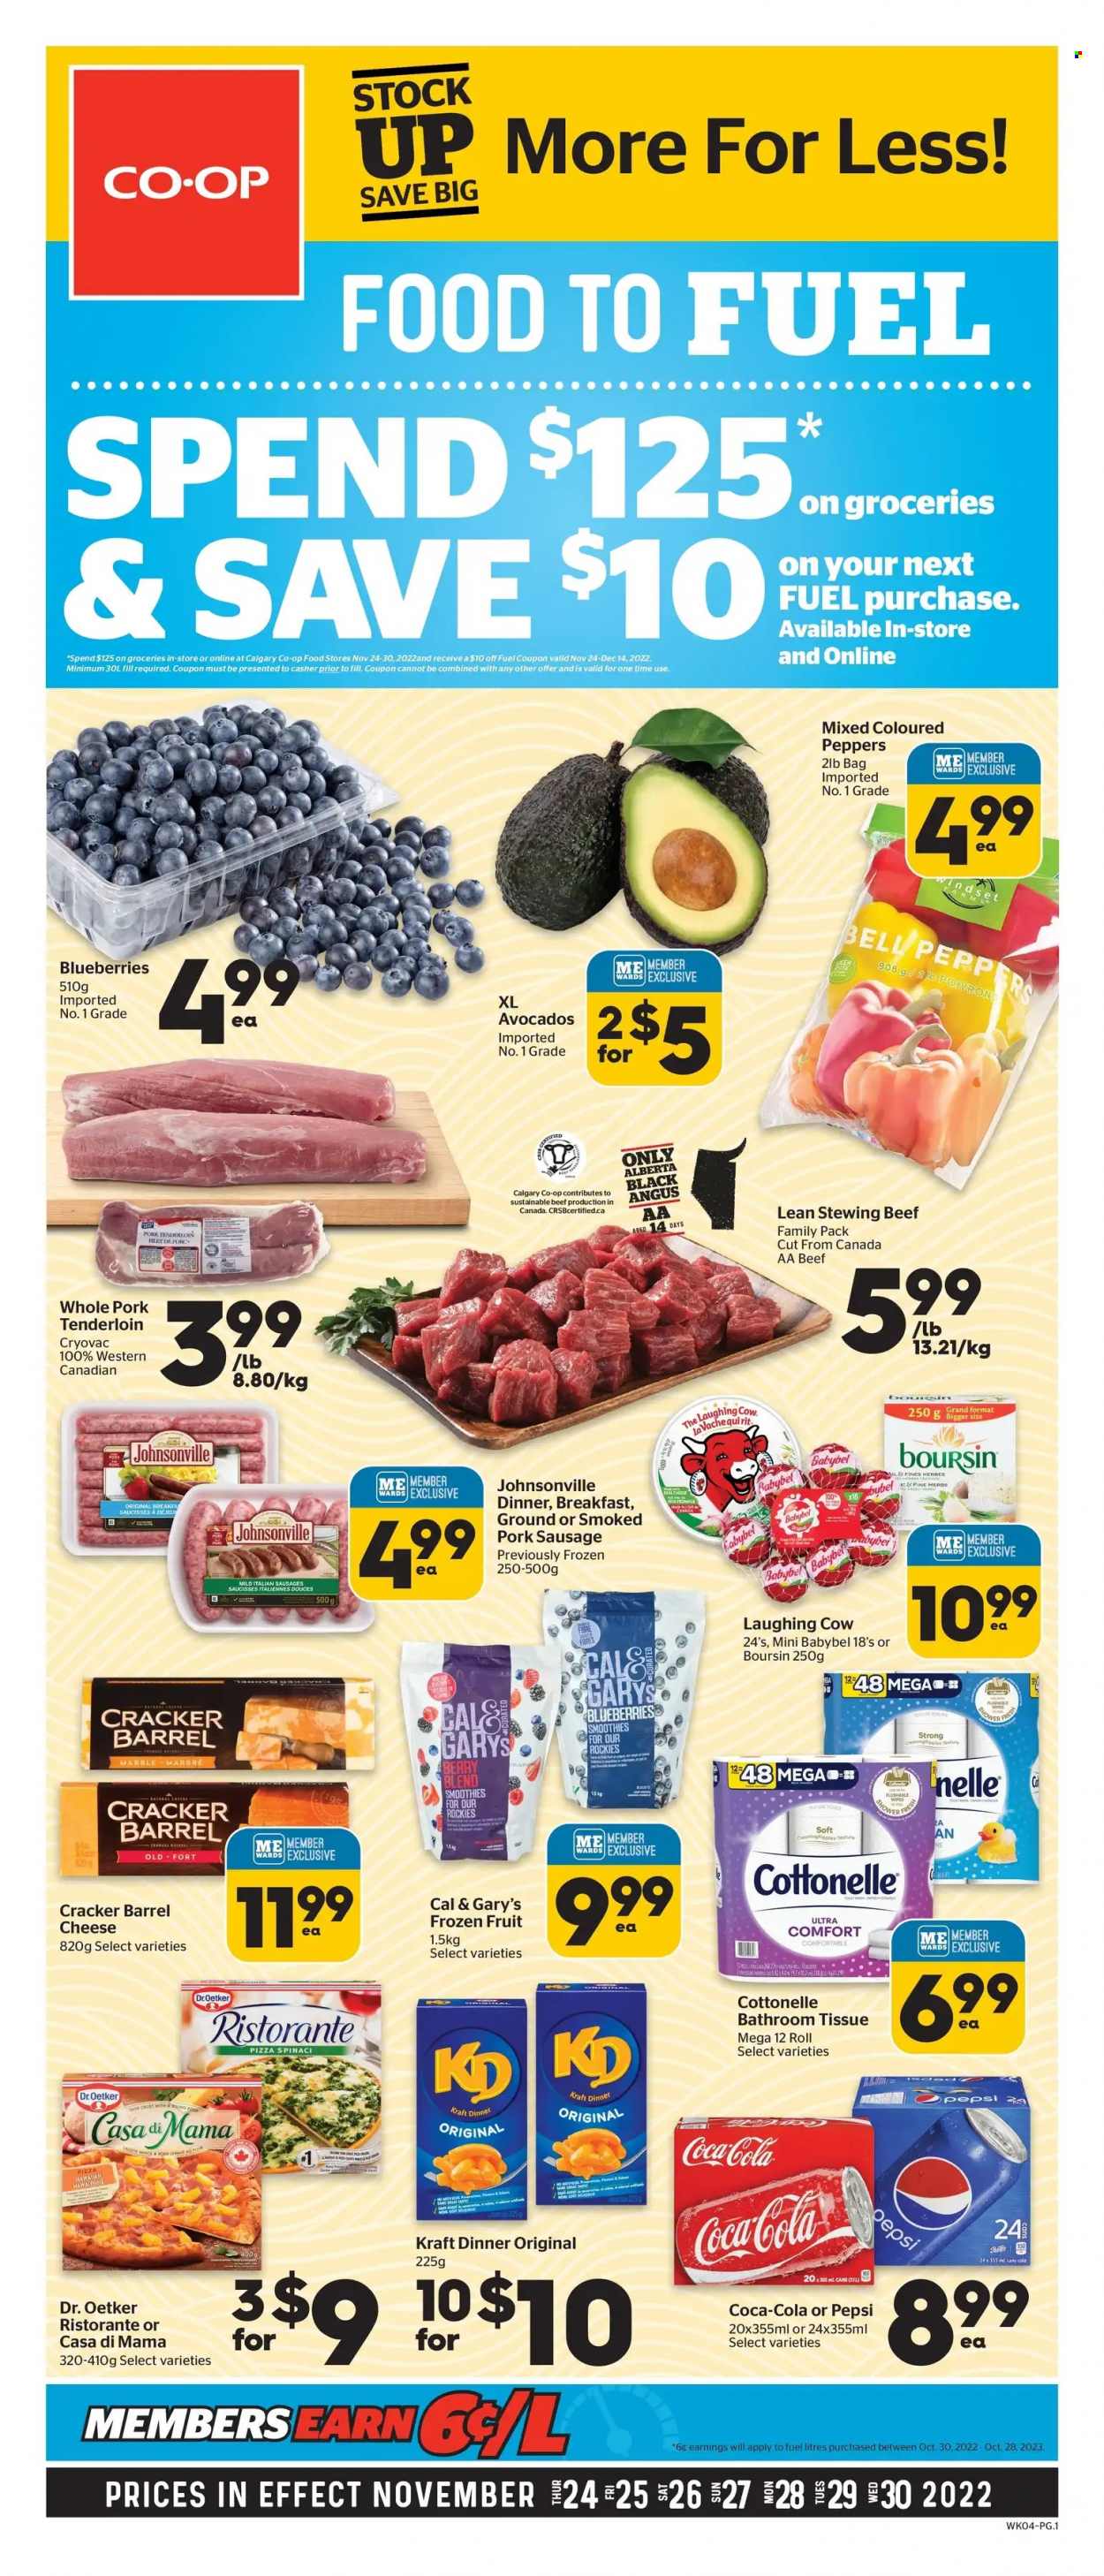 thumbnail - Calgary Co-op Flyer - November 24, 2022 - November 30, 2022 - Sales products - bell peppers, peppers, avocado, blueberries, pizza, Kraft®, Johnsonville, sausage, pork sausage, The Laughing Cow, Dr. Oetker, Babybel, crackers, Coca-Cola, Pepsi, smoothie, beef meat, stewing beef, pork meat, pork tenderloin, bath tissue, Cottonelle. Page 1.